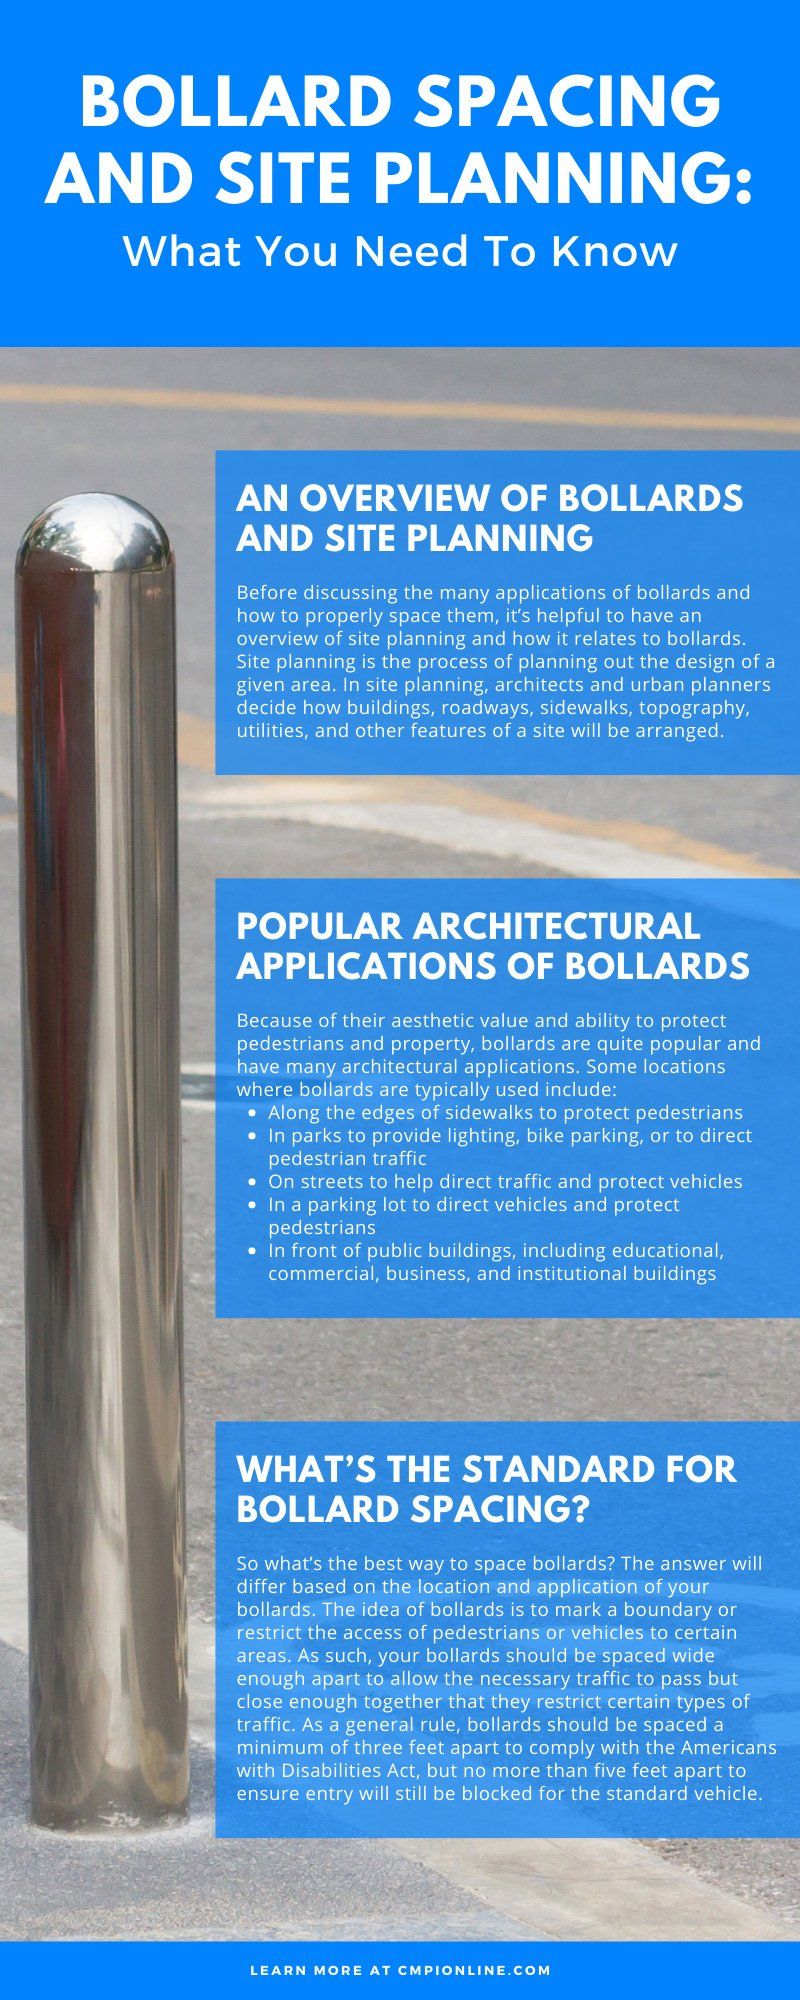 Bollard Spacing and Site Planning: What You Need To Know